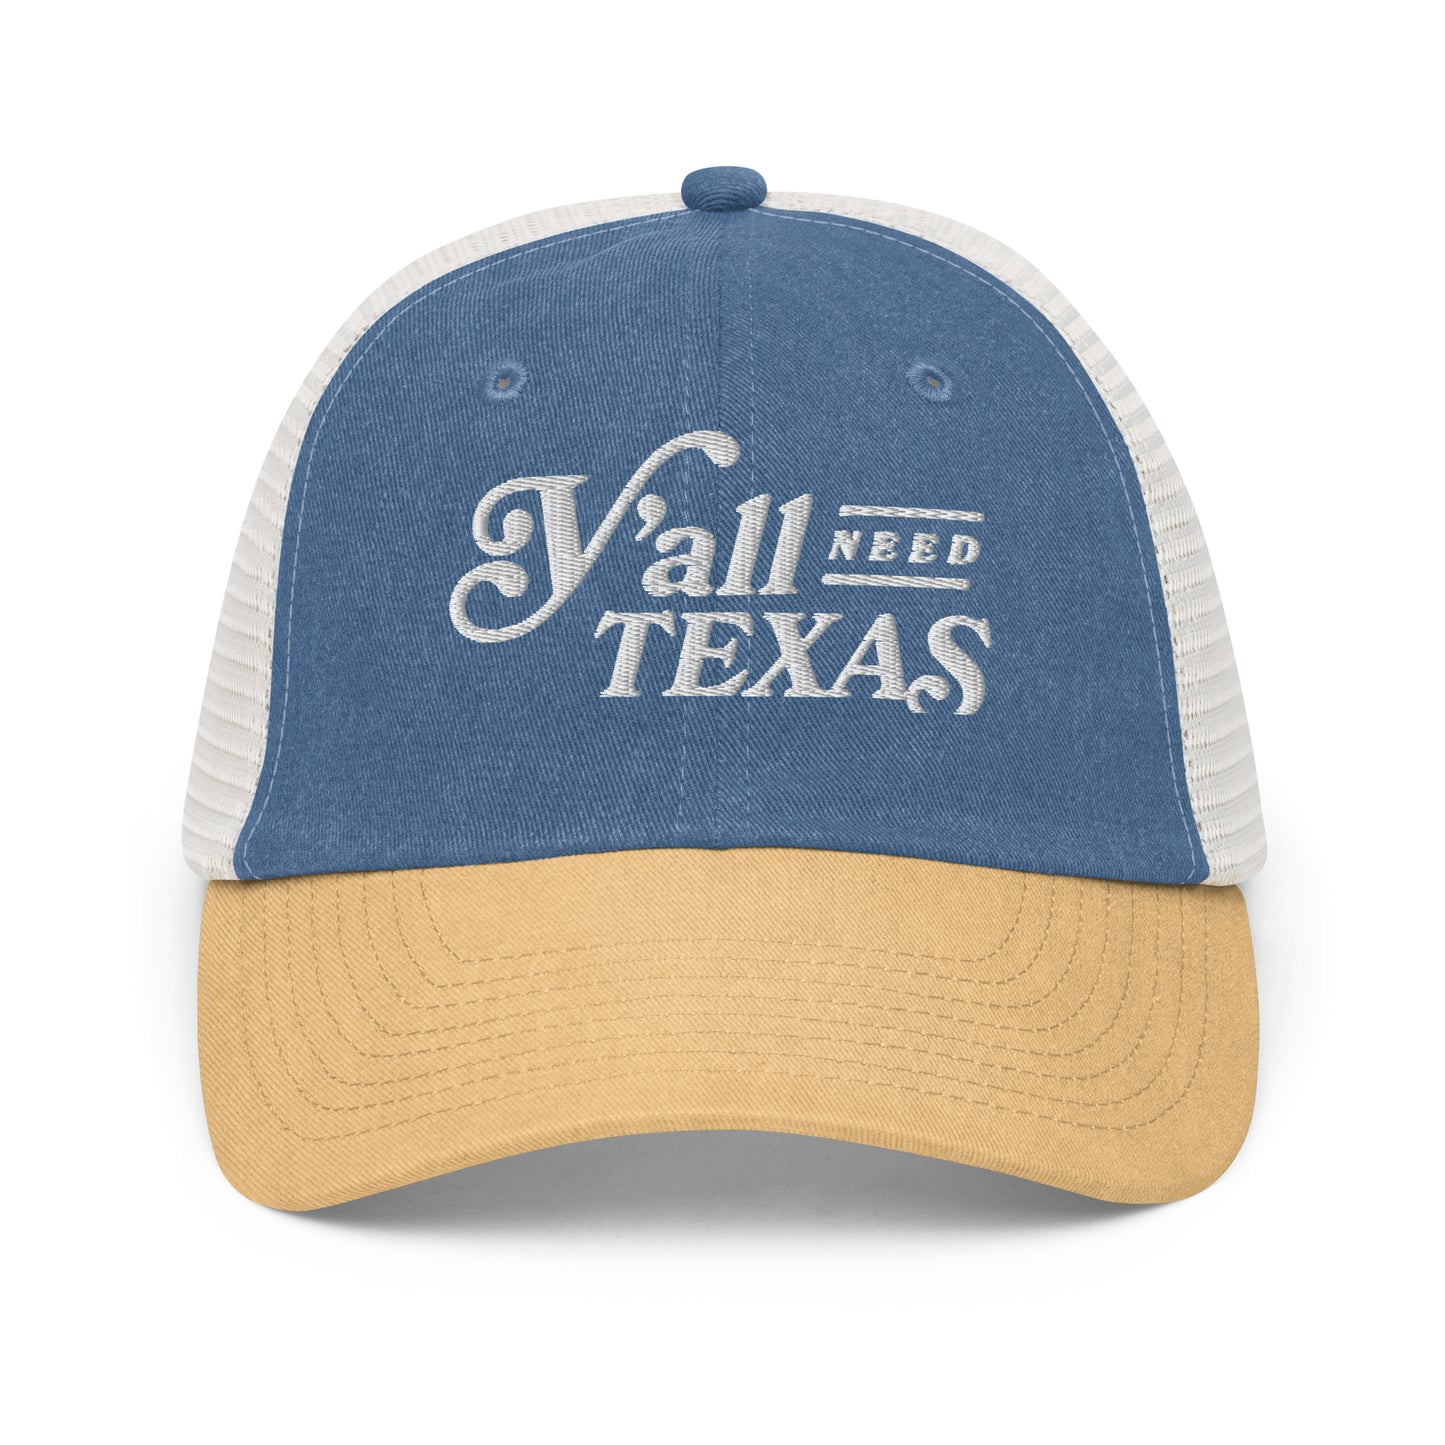 Y’all Need Texas Two Tone Cap